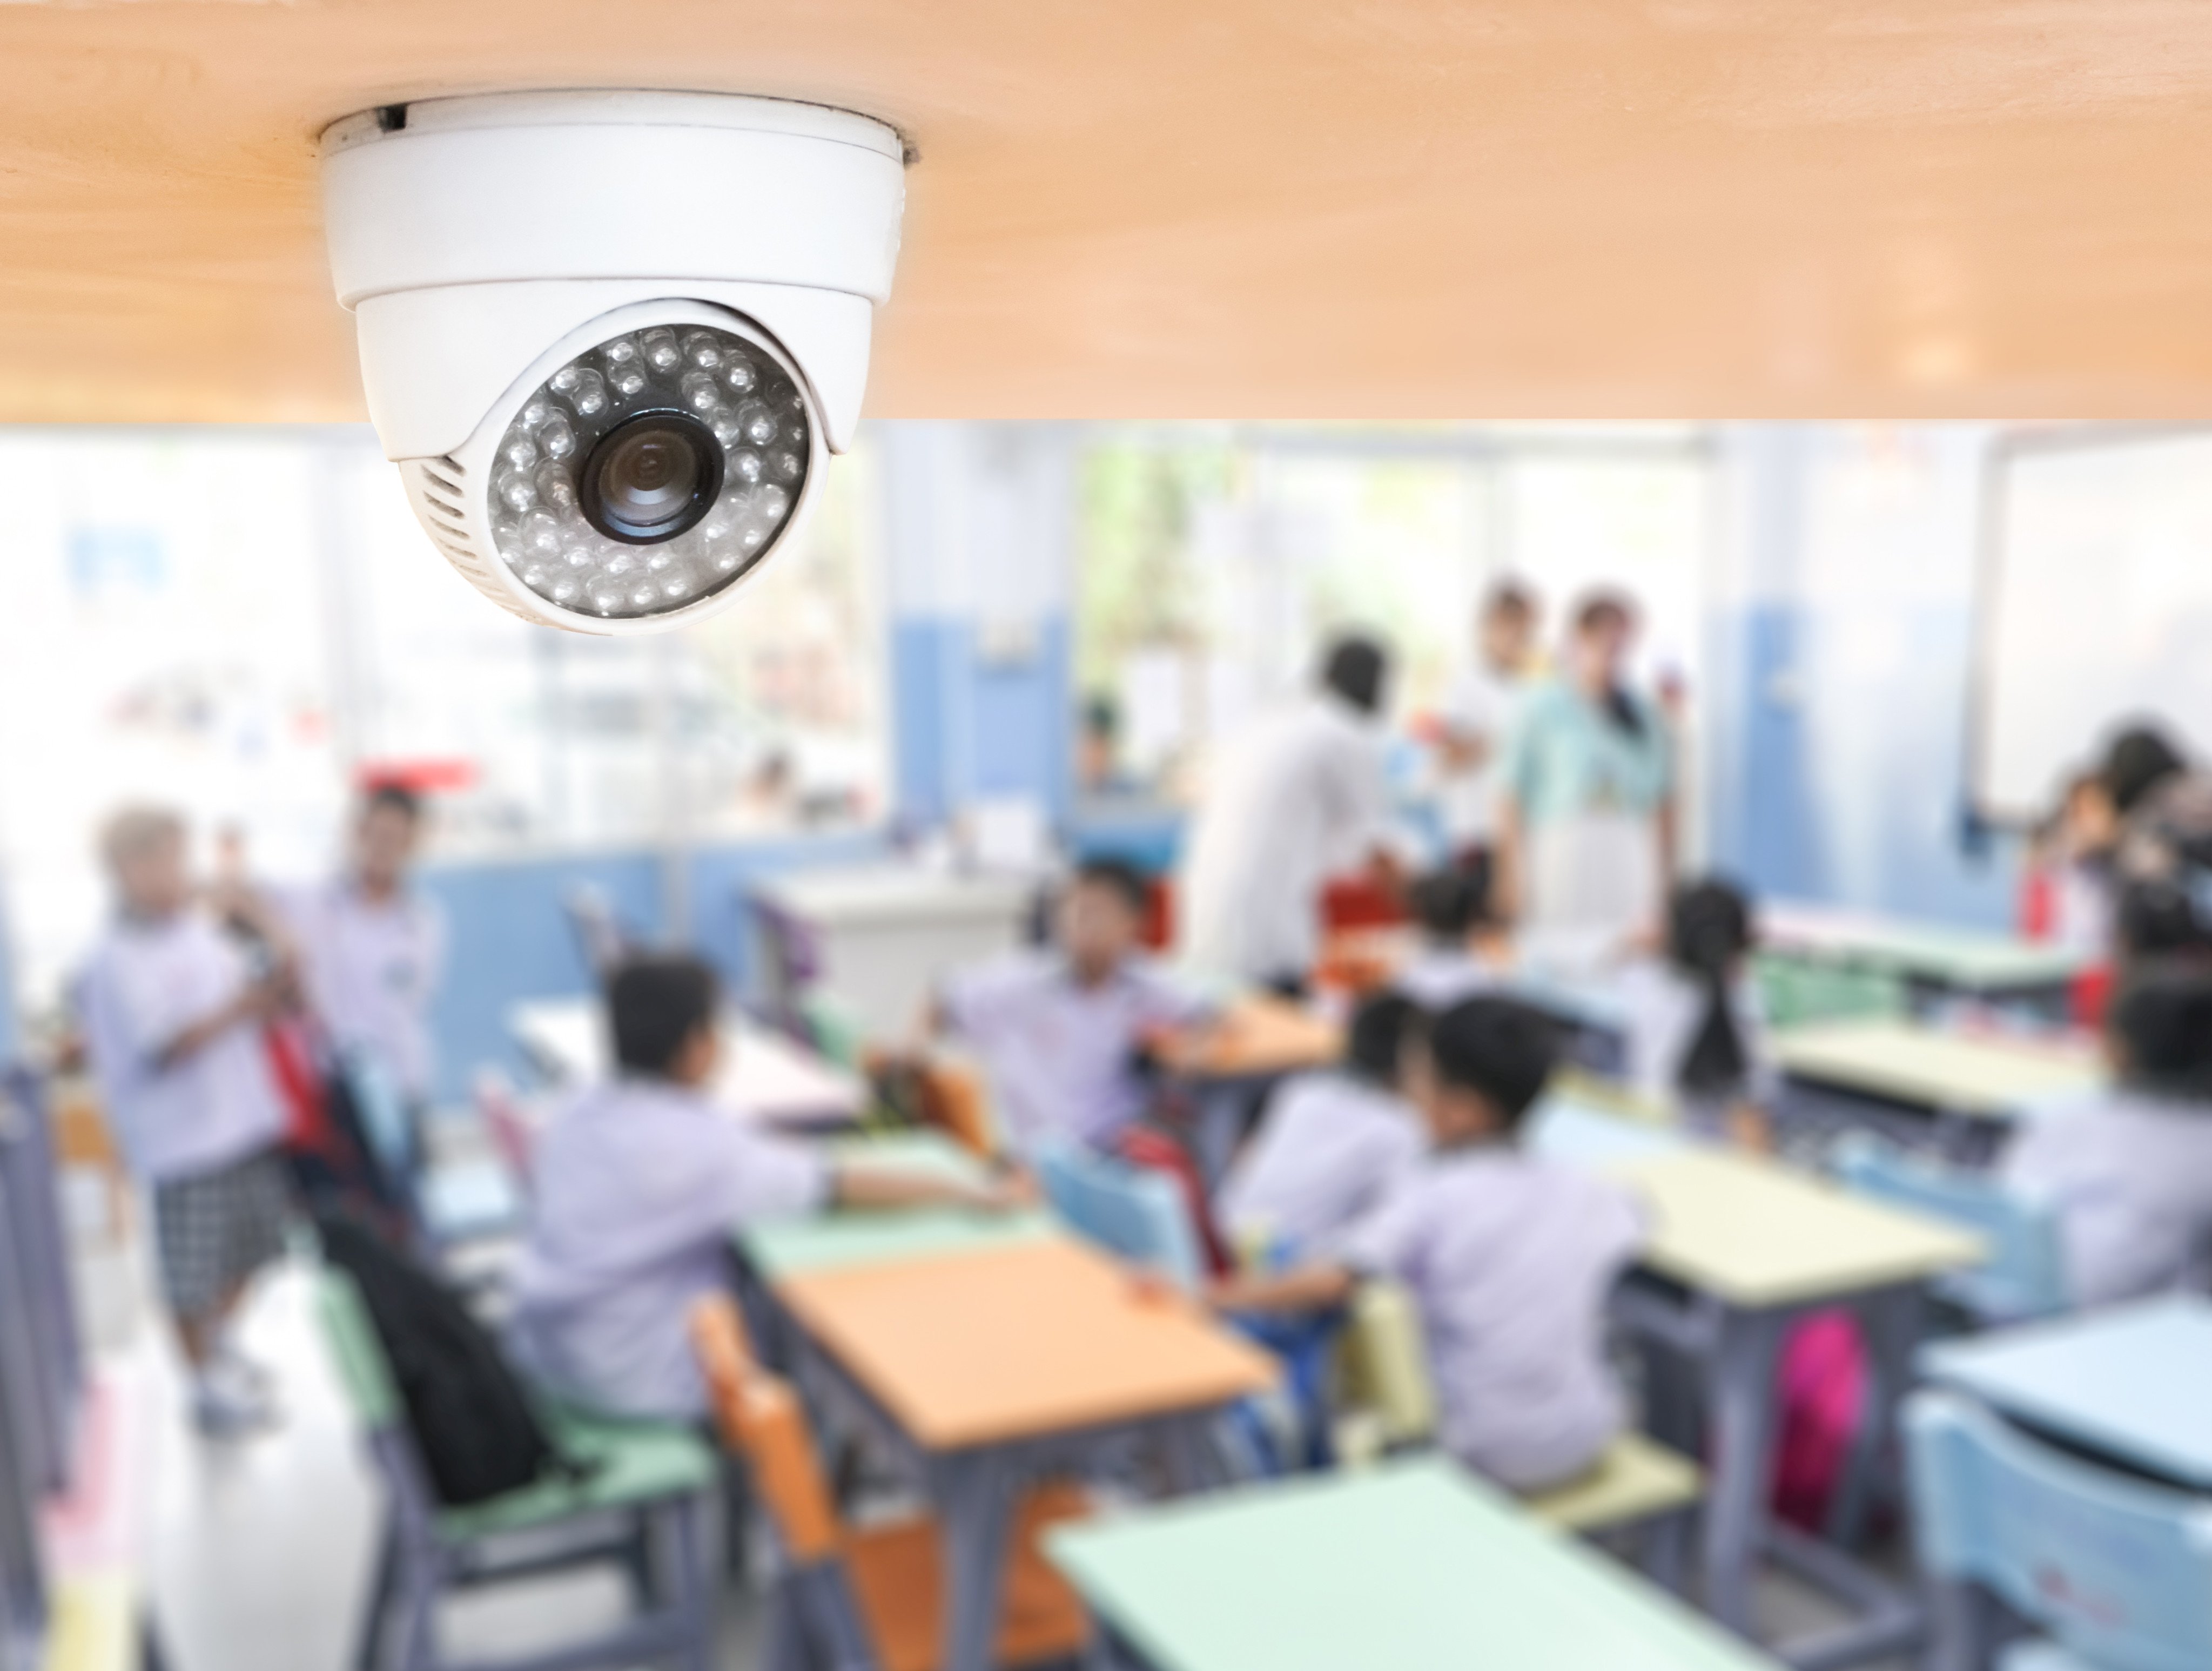 CCTV Security monitoring student in classroom at school. Photo: Shutterstock